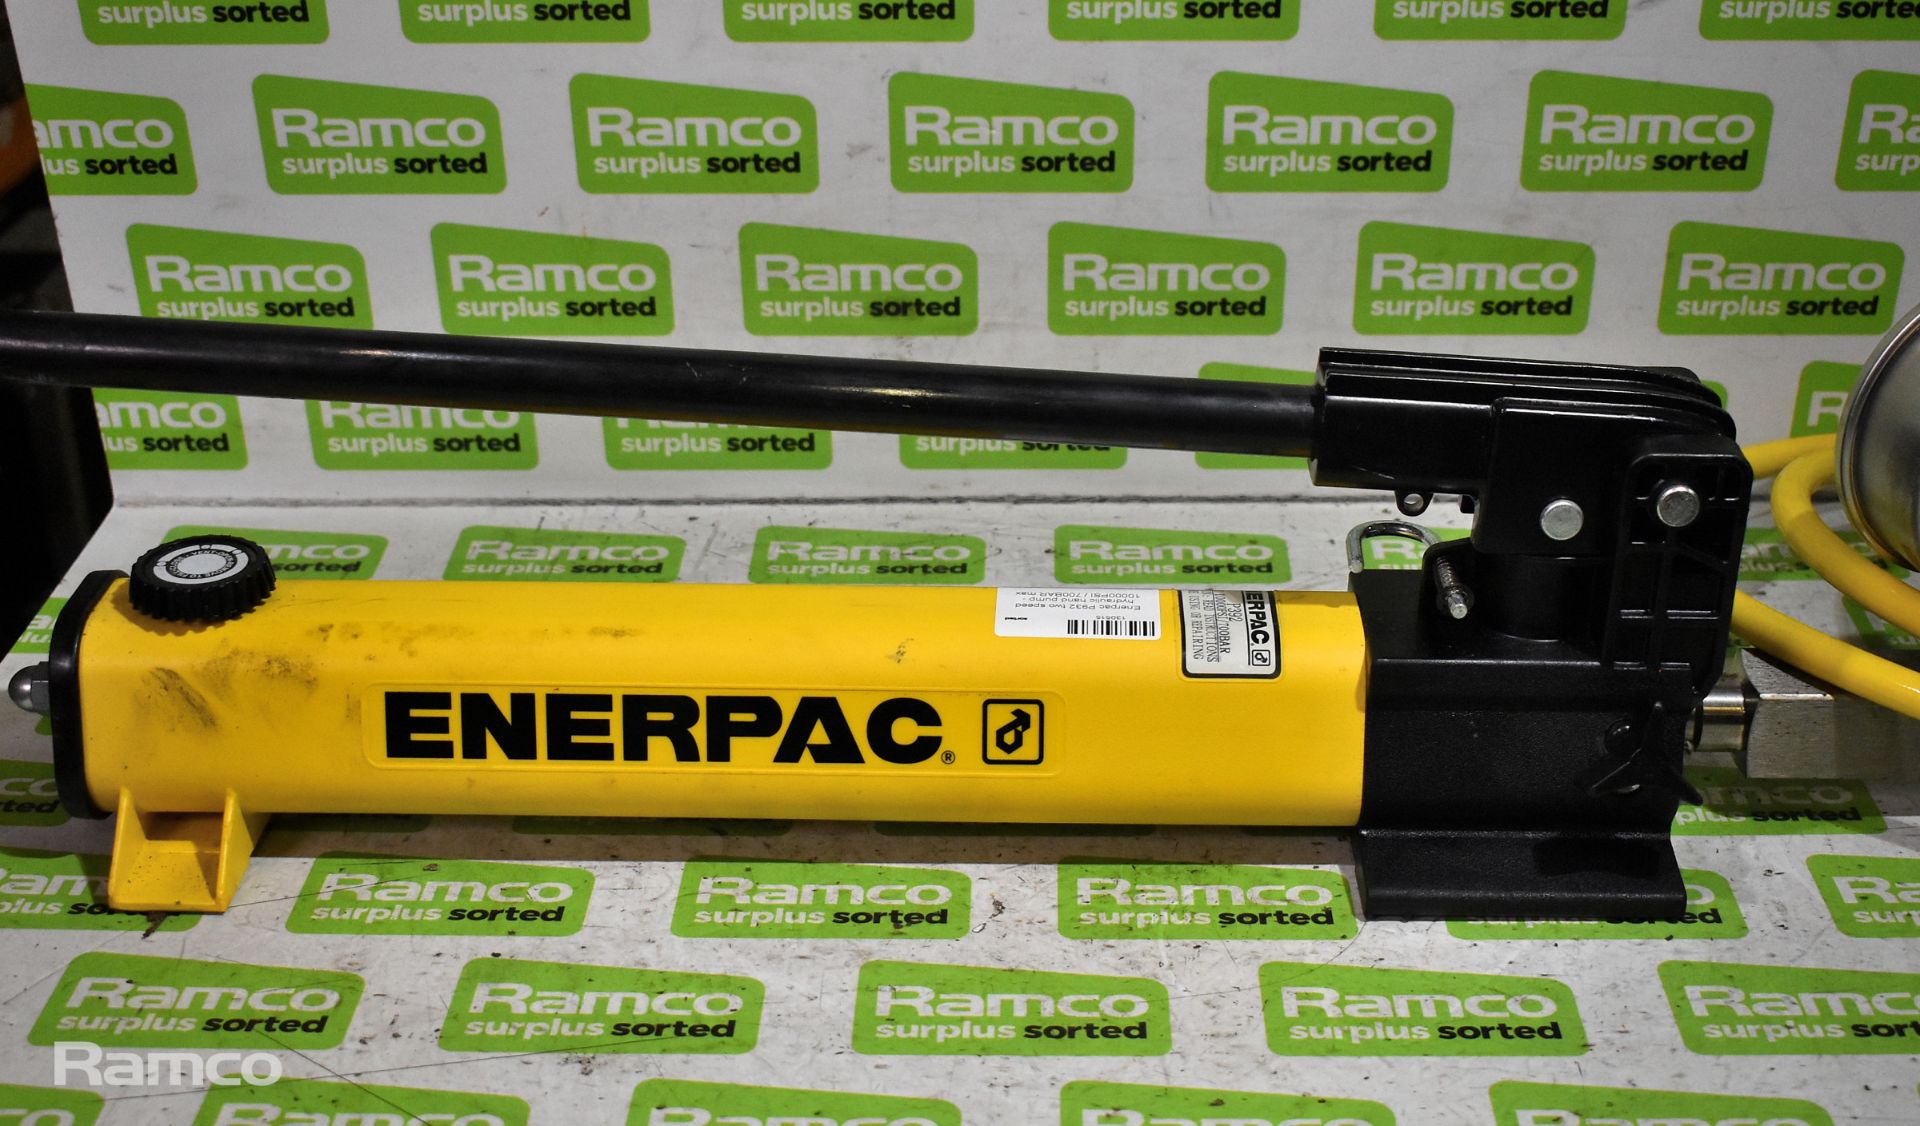 Enerpac P932 two speed hydraulic hand pump - 10000 PSI / 700 BAR max - Image 5 of 5